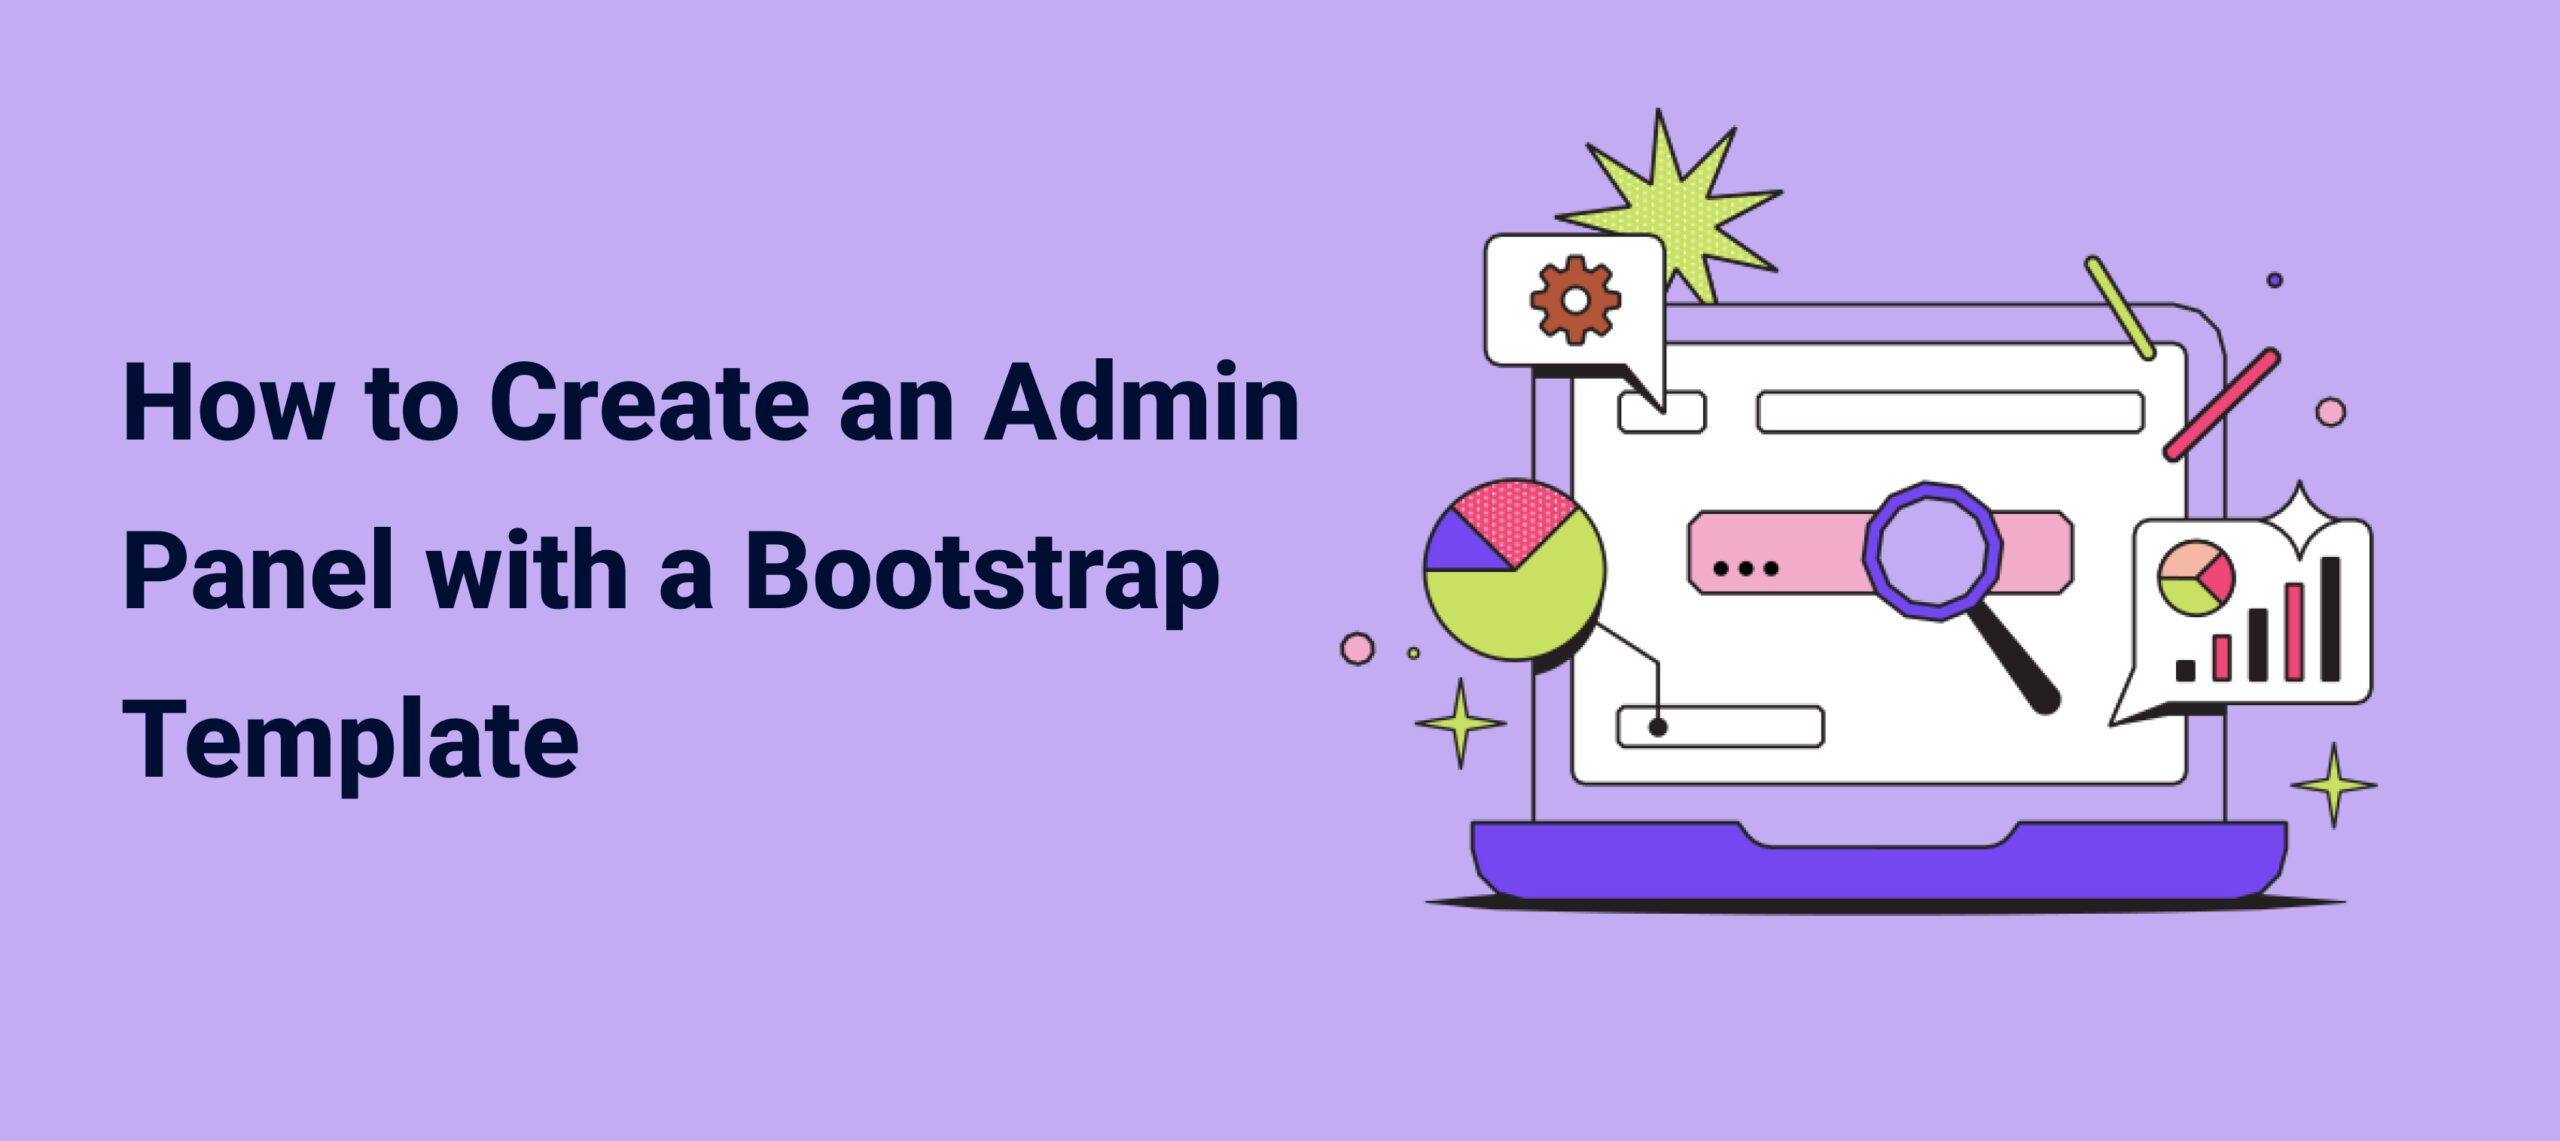  How to Create an Admin Panel with a Bootstrap Template